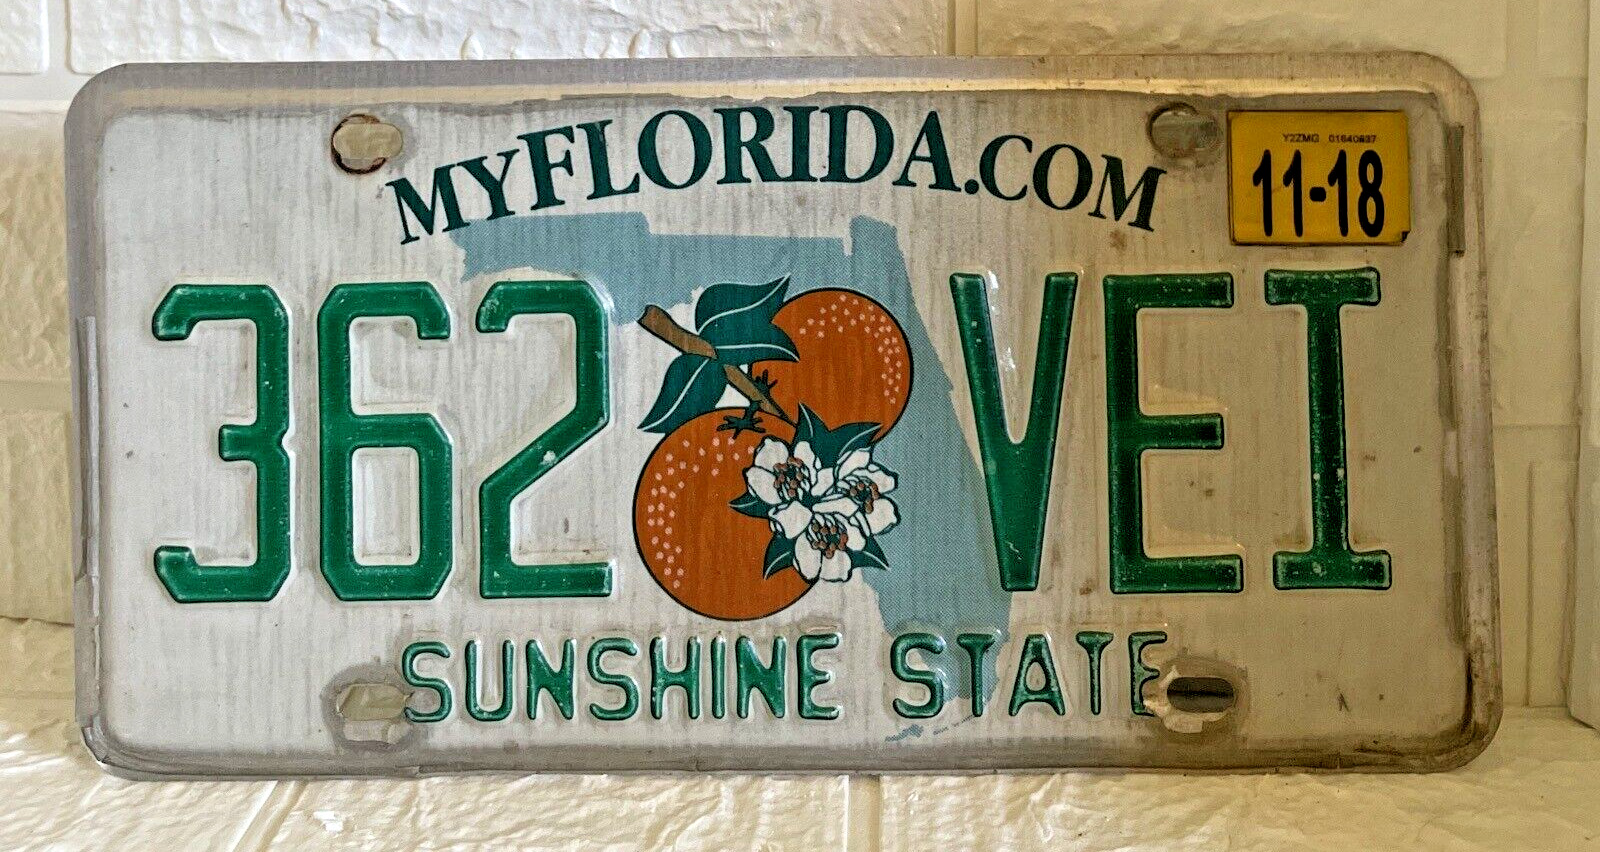 FLORIDA License Plate 362 VEI Sunshine State (2018) - Great Cond